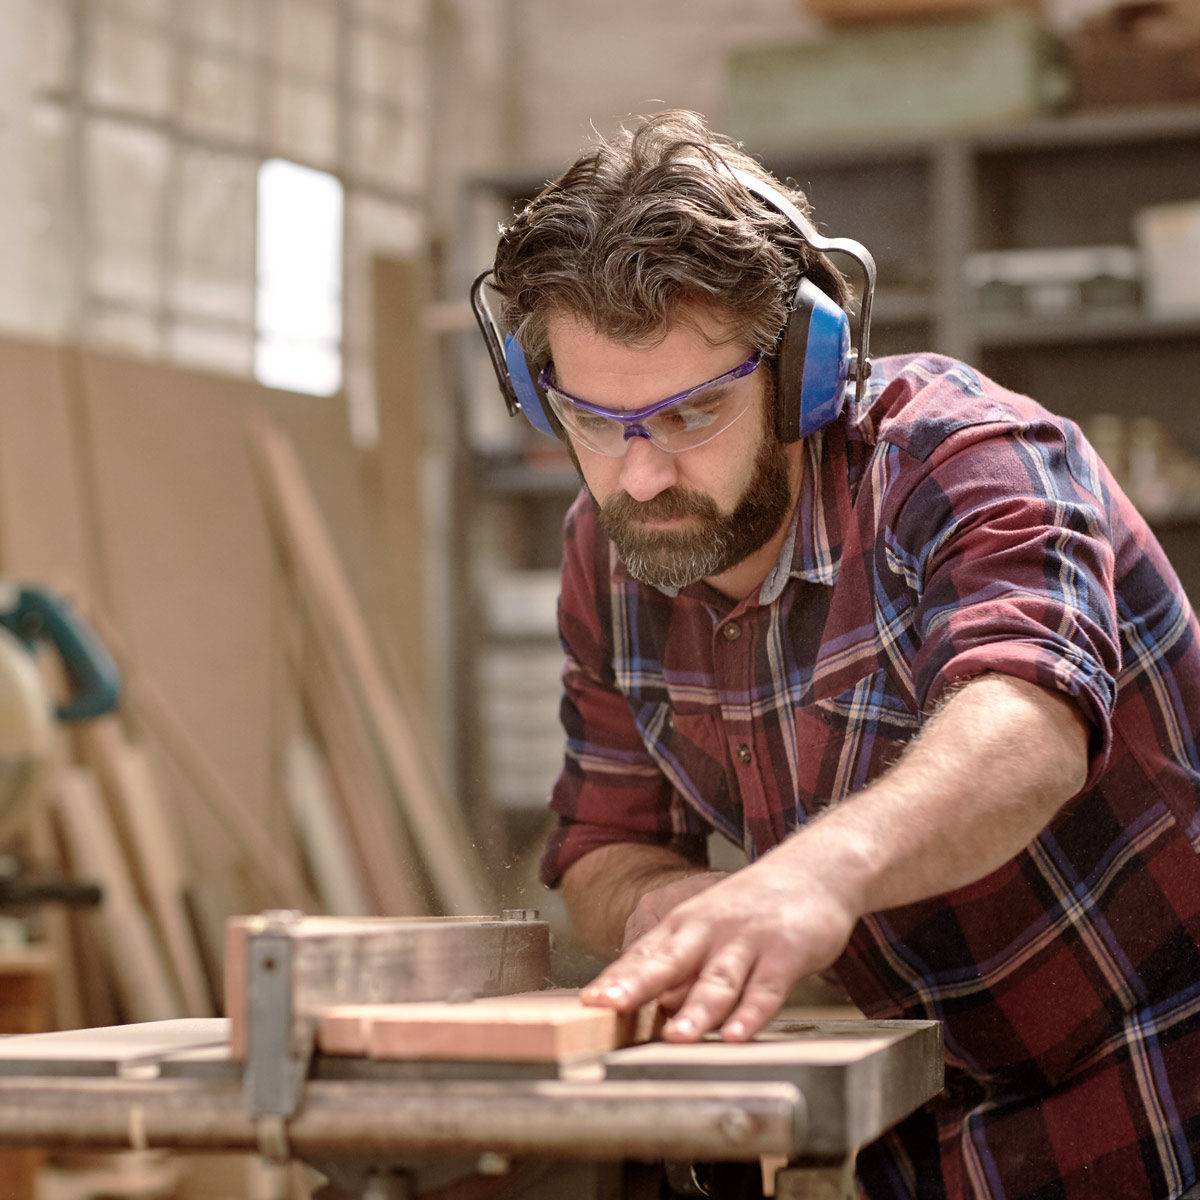 Man with beard cutting wood with a table saw.